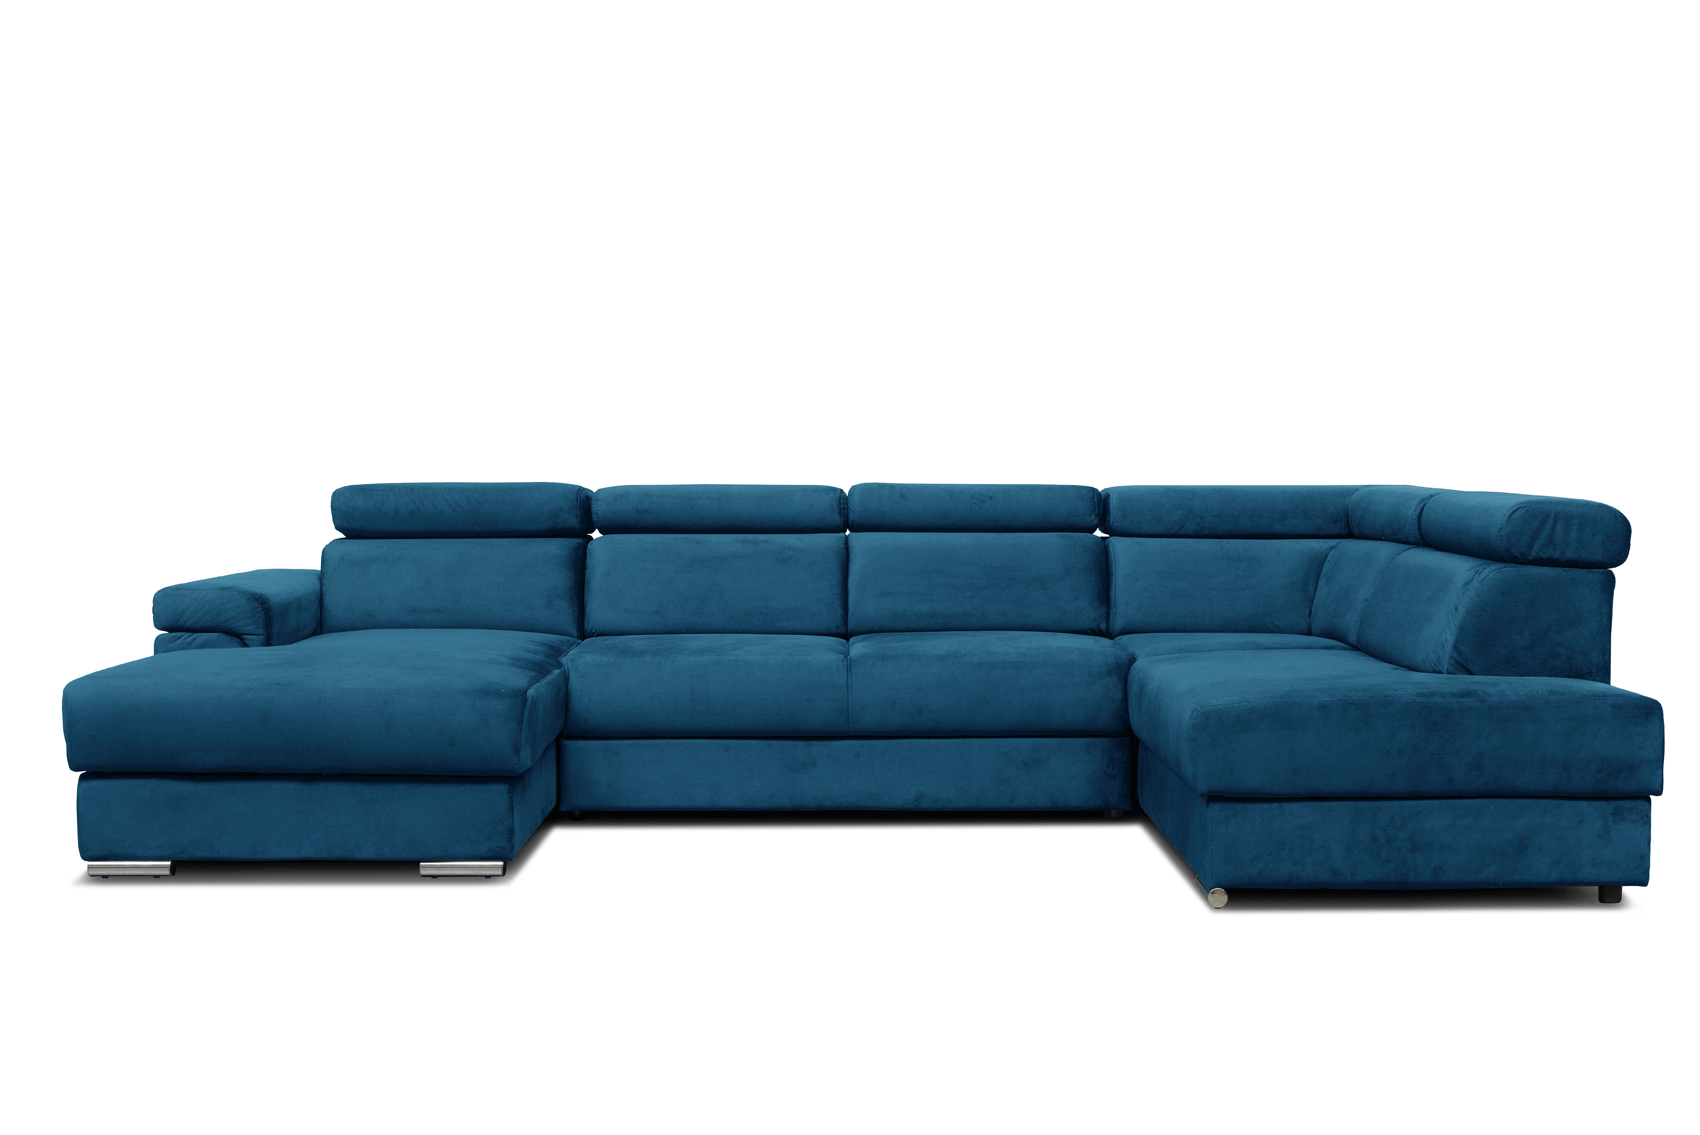 Living Room Furniture Reclining and Sliding Seats Sets Carlo U-Shaped Sectional